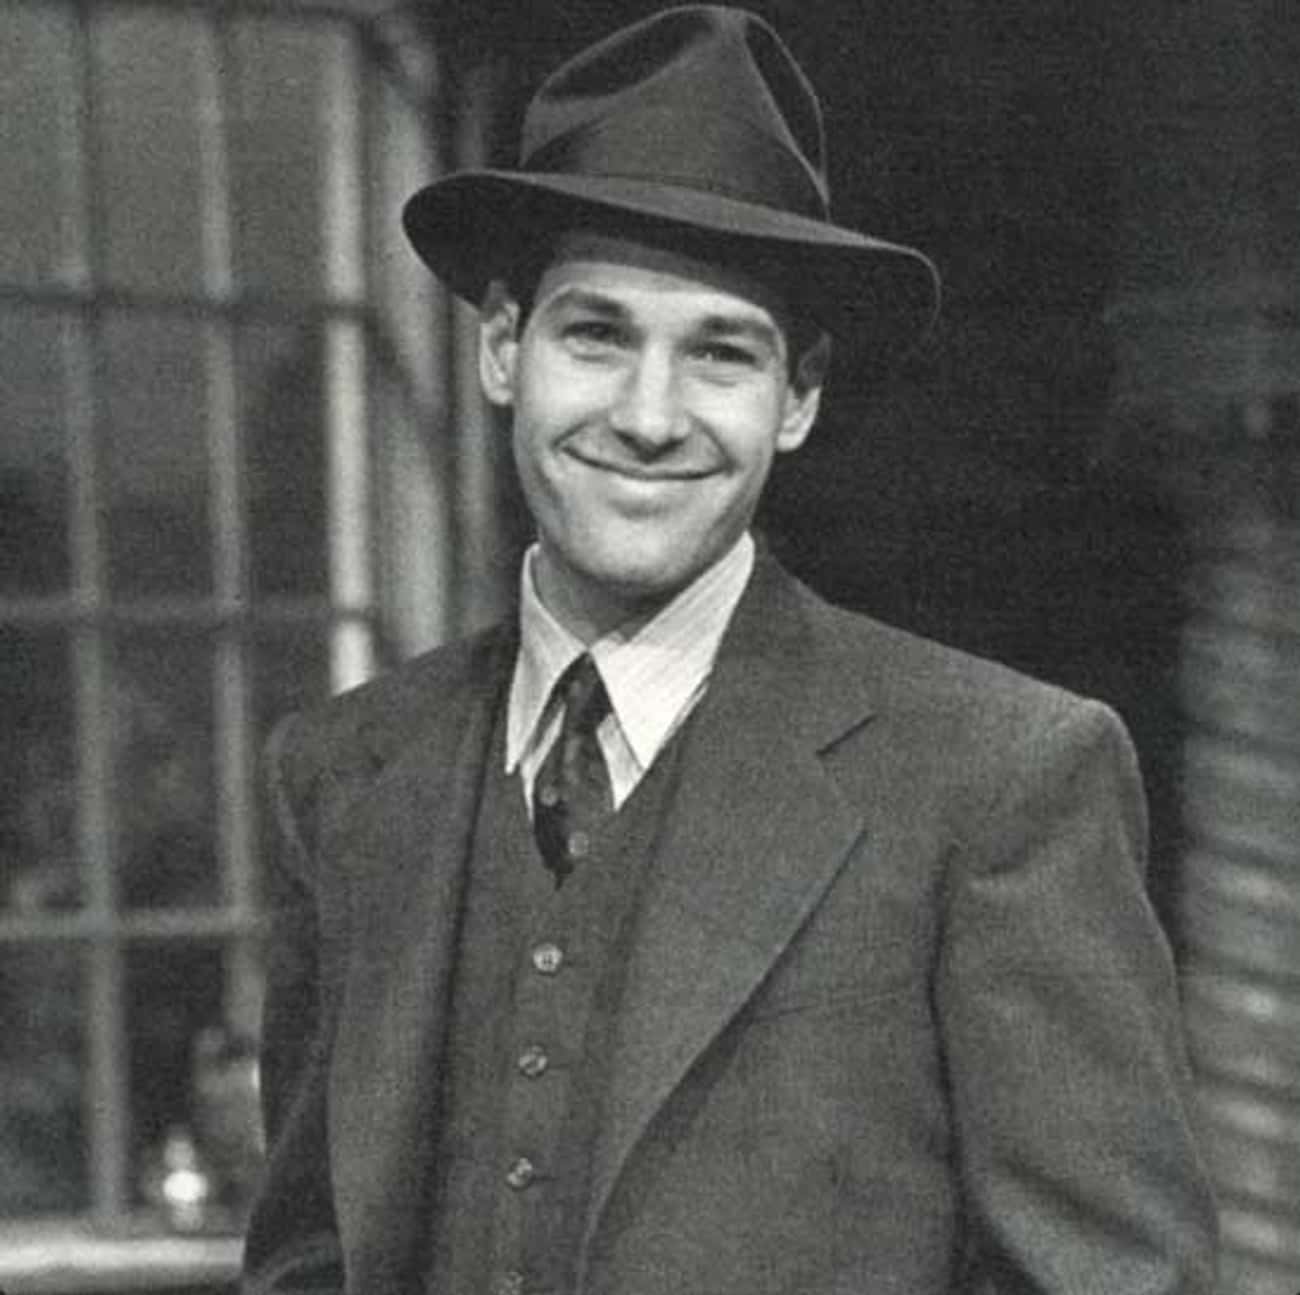 Young Paul Rudd in Gray Suit and Hat